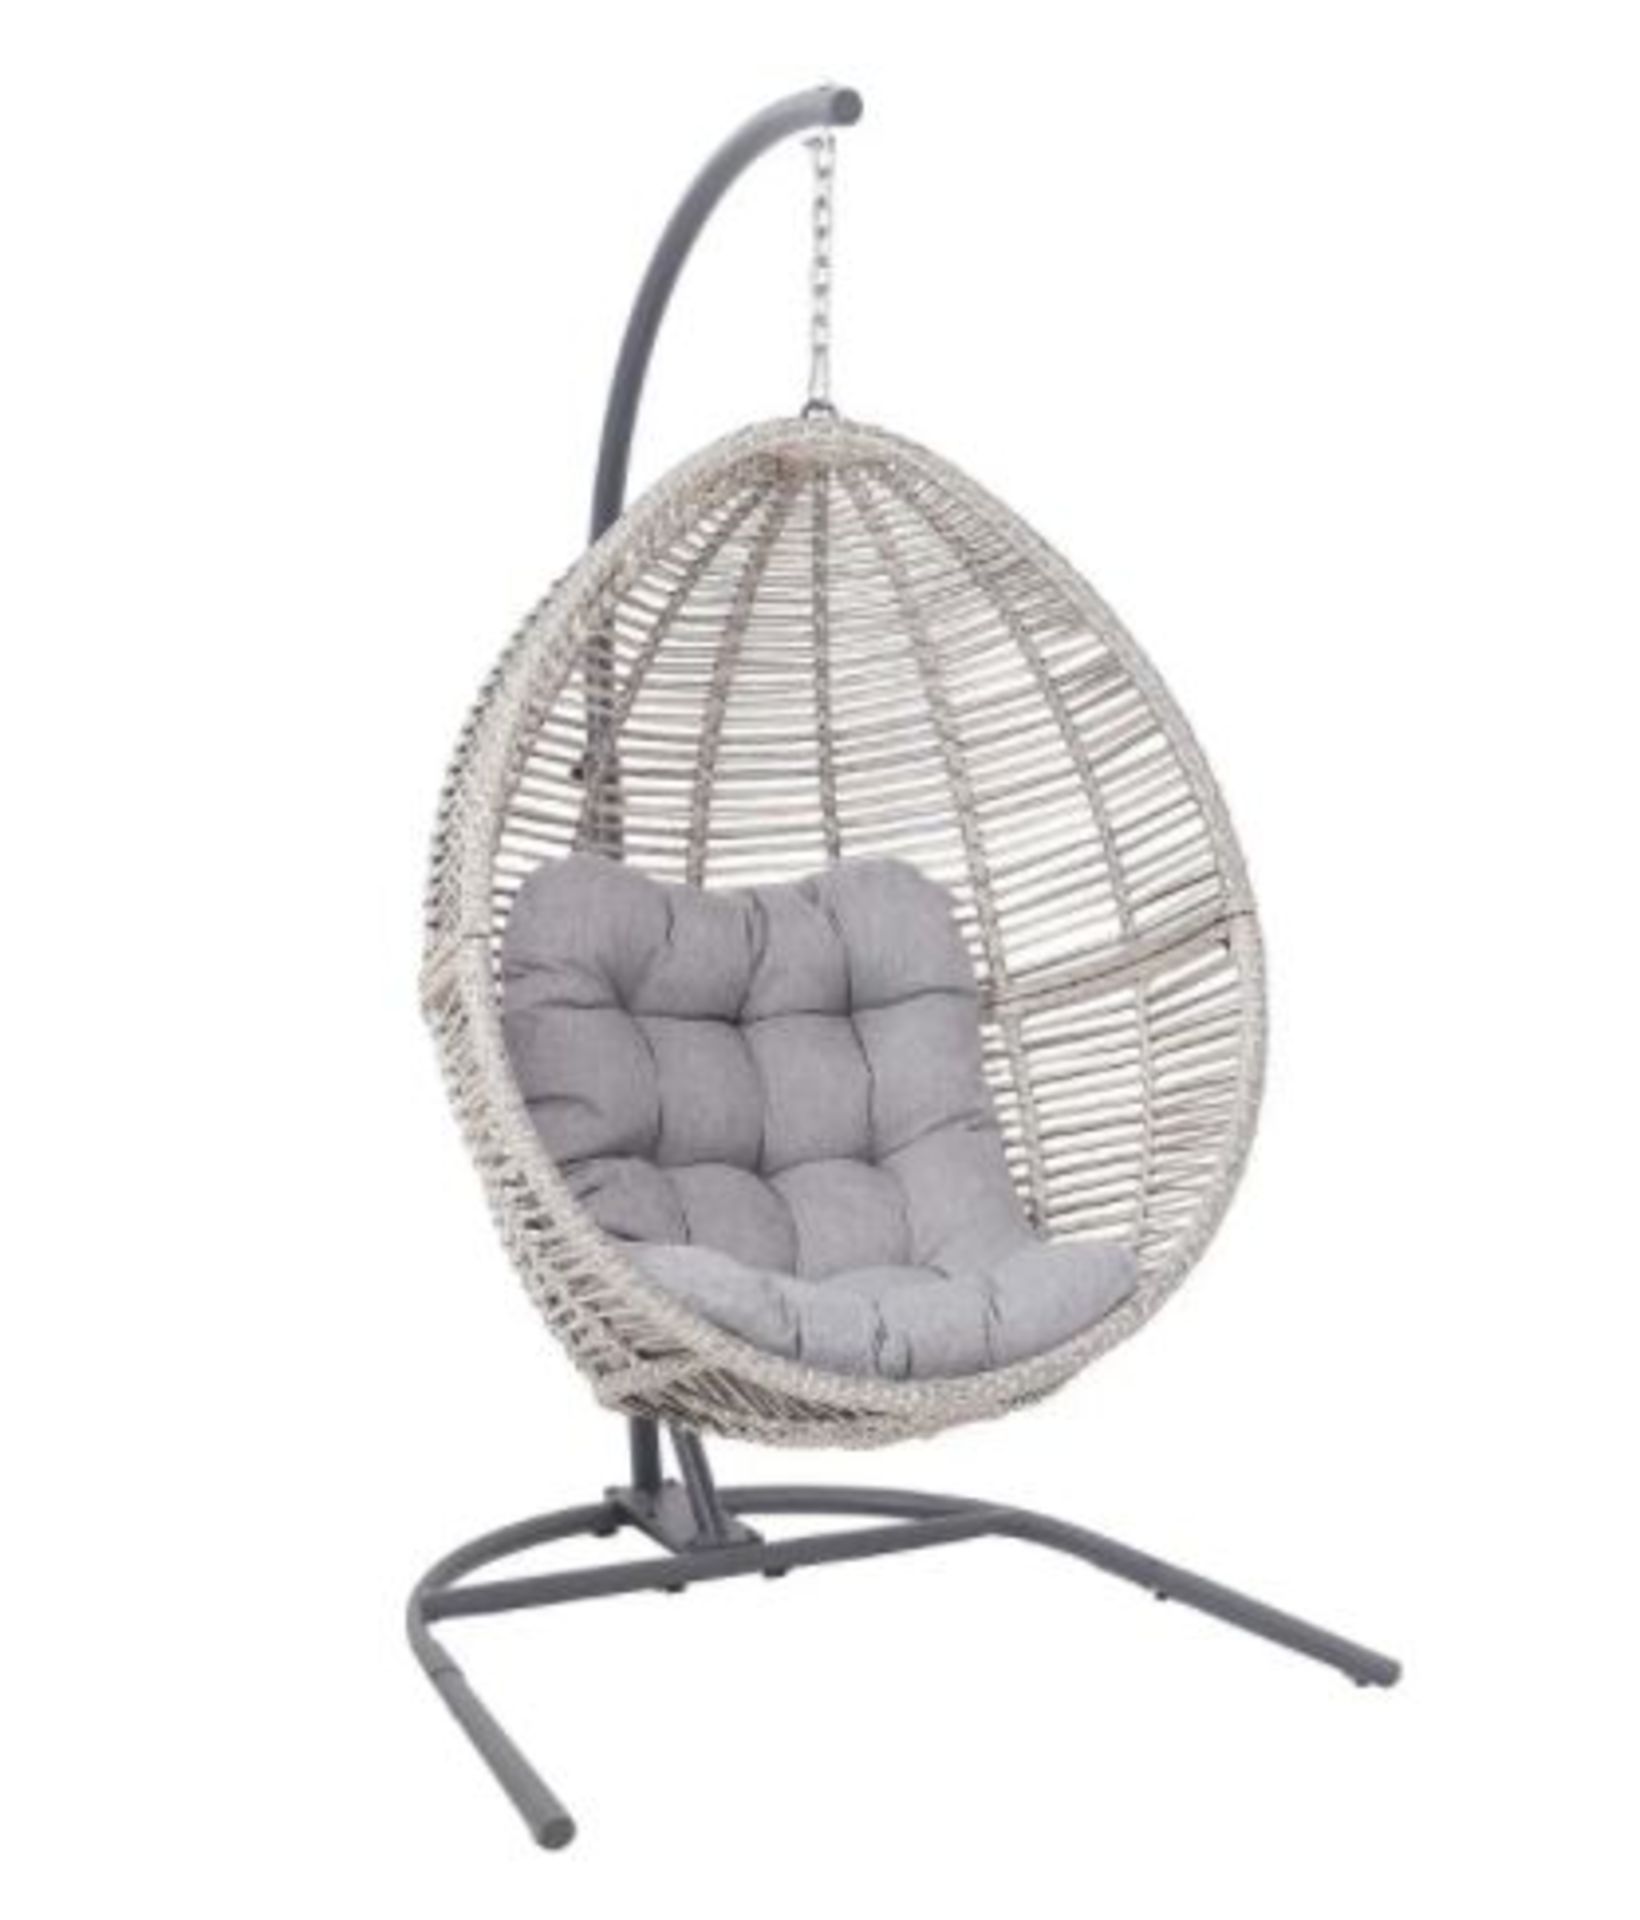 1x Hartington Florence Collection Hanging Chair RRP £280. Contents Appear As New, Complete With Fix - Image 2 of 3